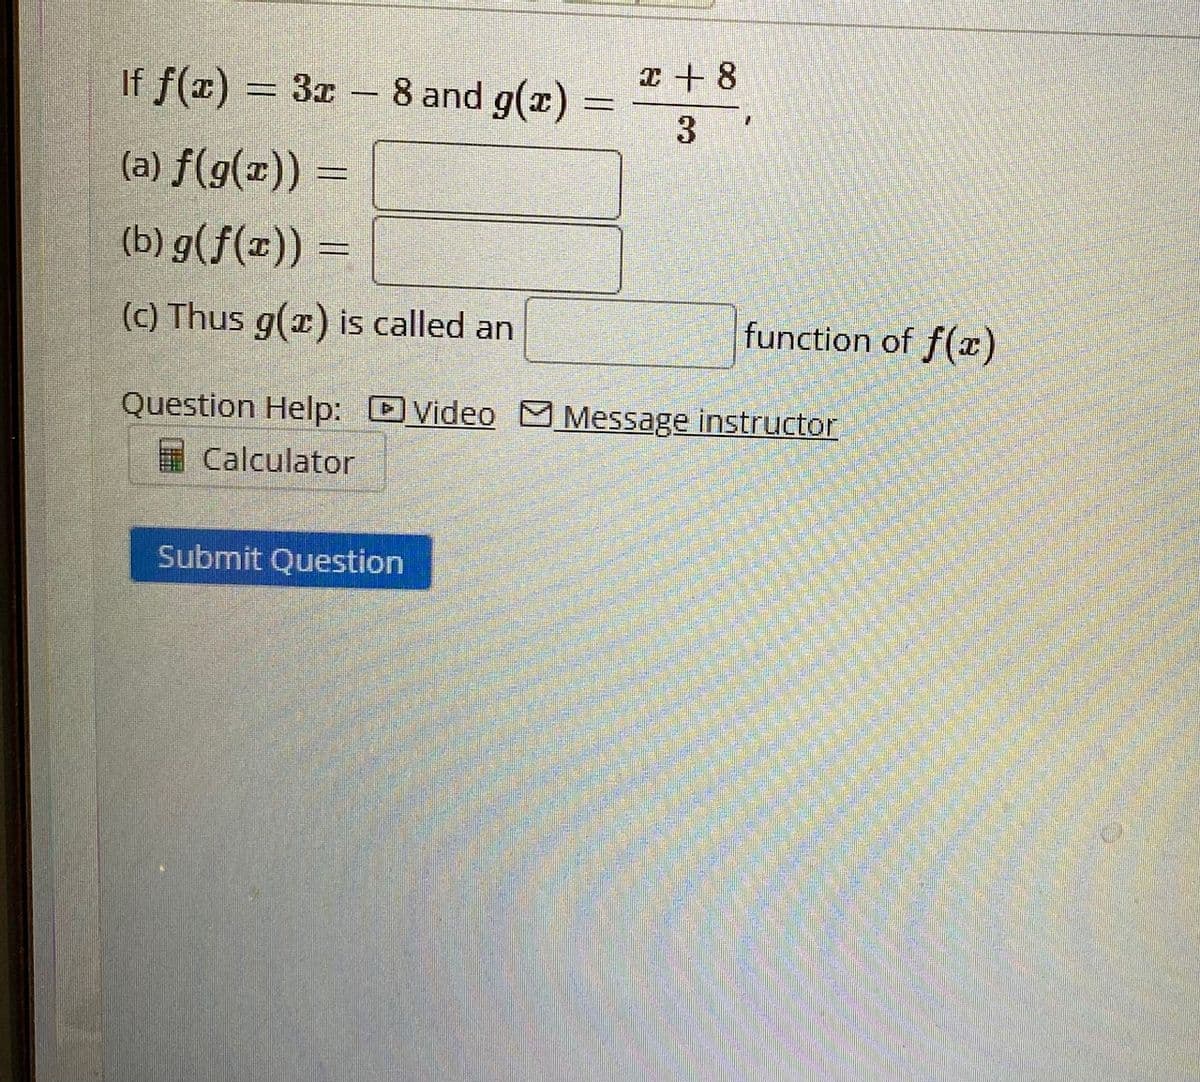 x+ 8
If f(x) = 3x
8 and g(x)
-
3
(a) f(g(x))
=
(b) g(f(x)) =
(c) Thus g(x) is called an
function of f(x)
Question Help: Video Message instructor
Calculator
Submit Question
